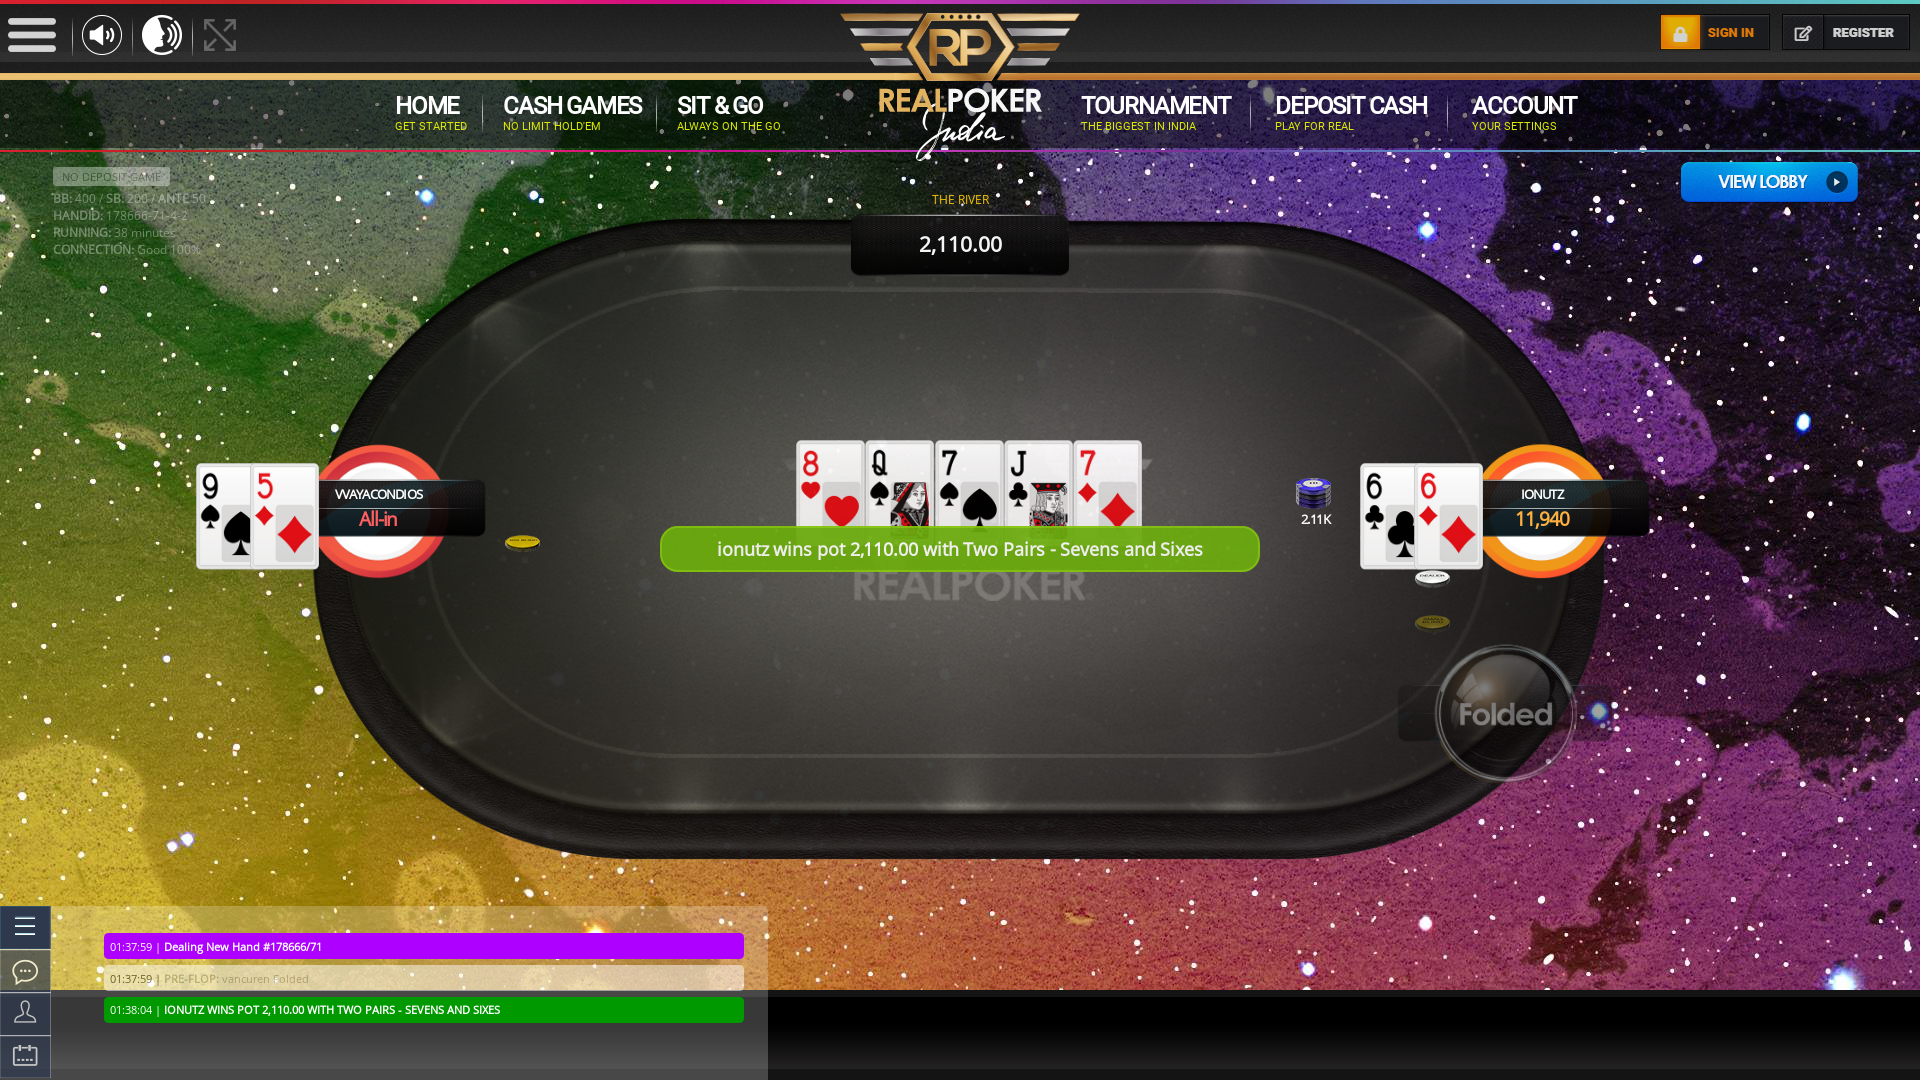 Santa Cruz, Mumbai online poker game on a 10 player table in the 38th minute of the game